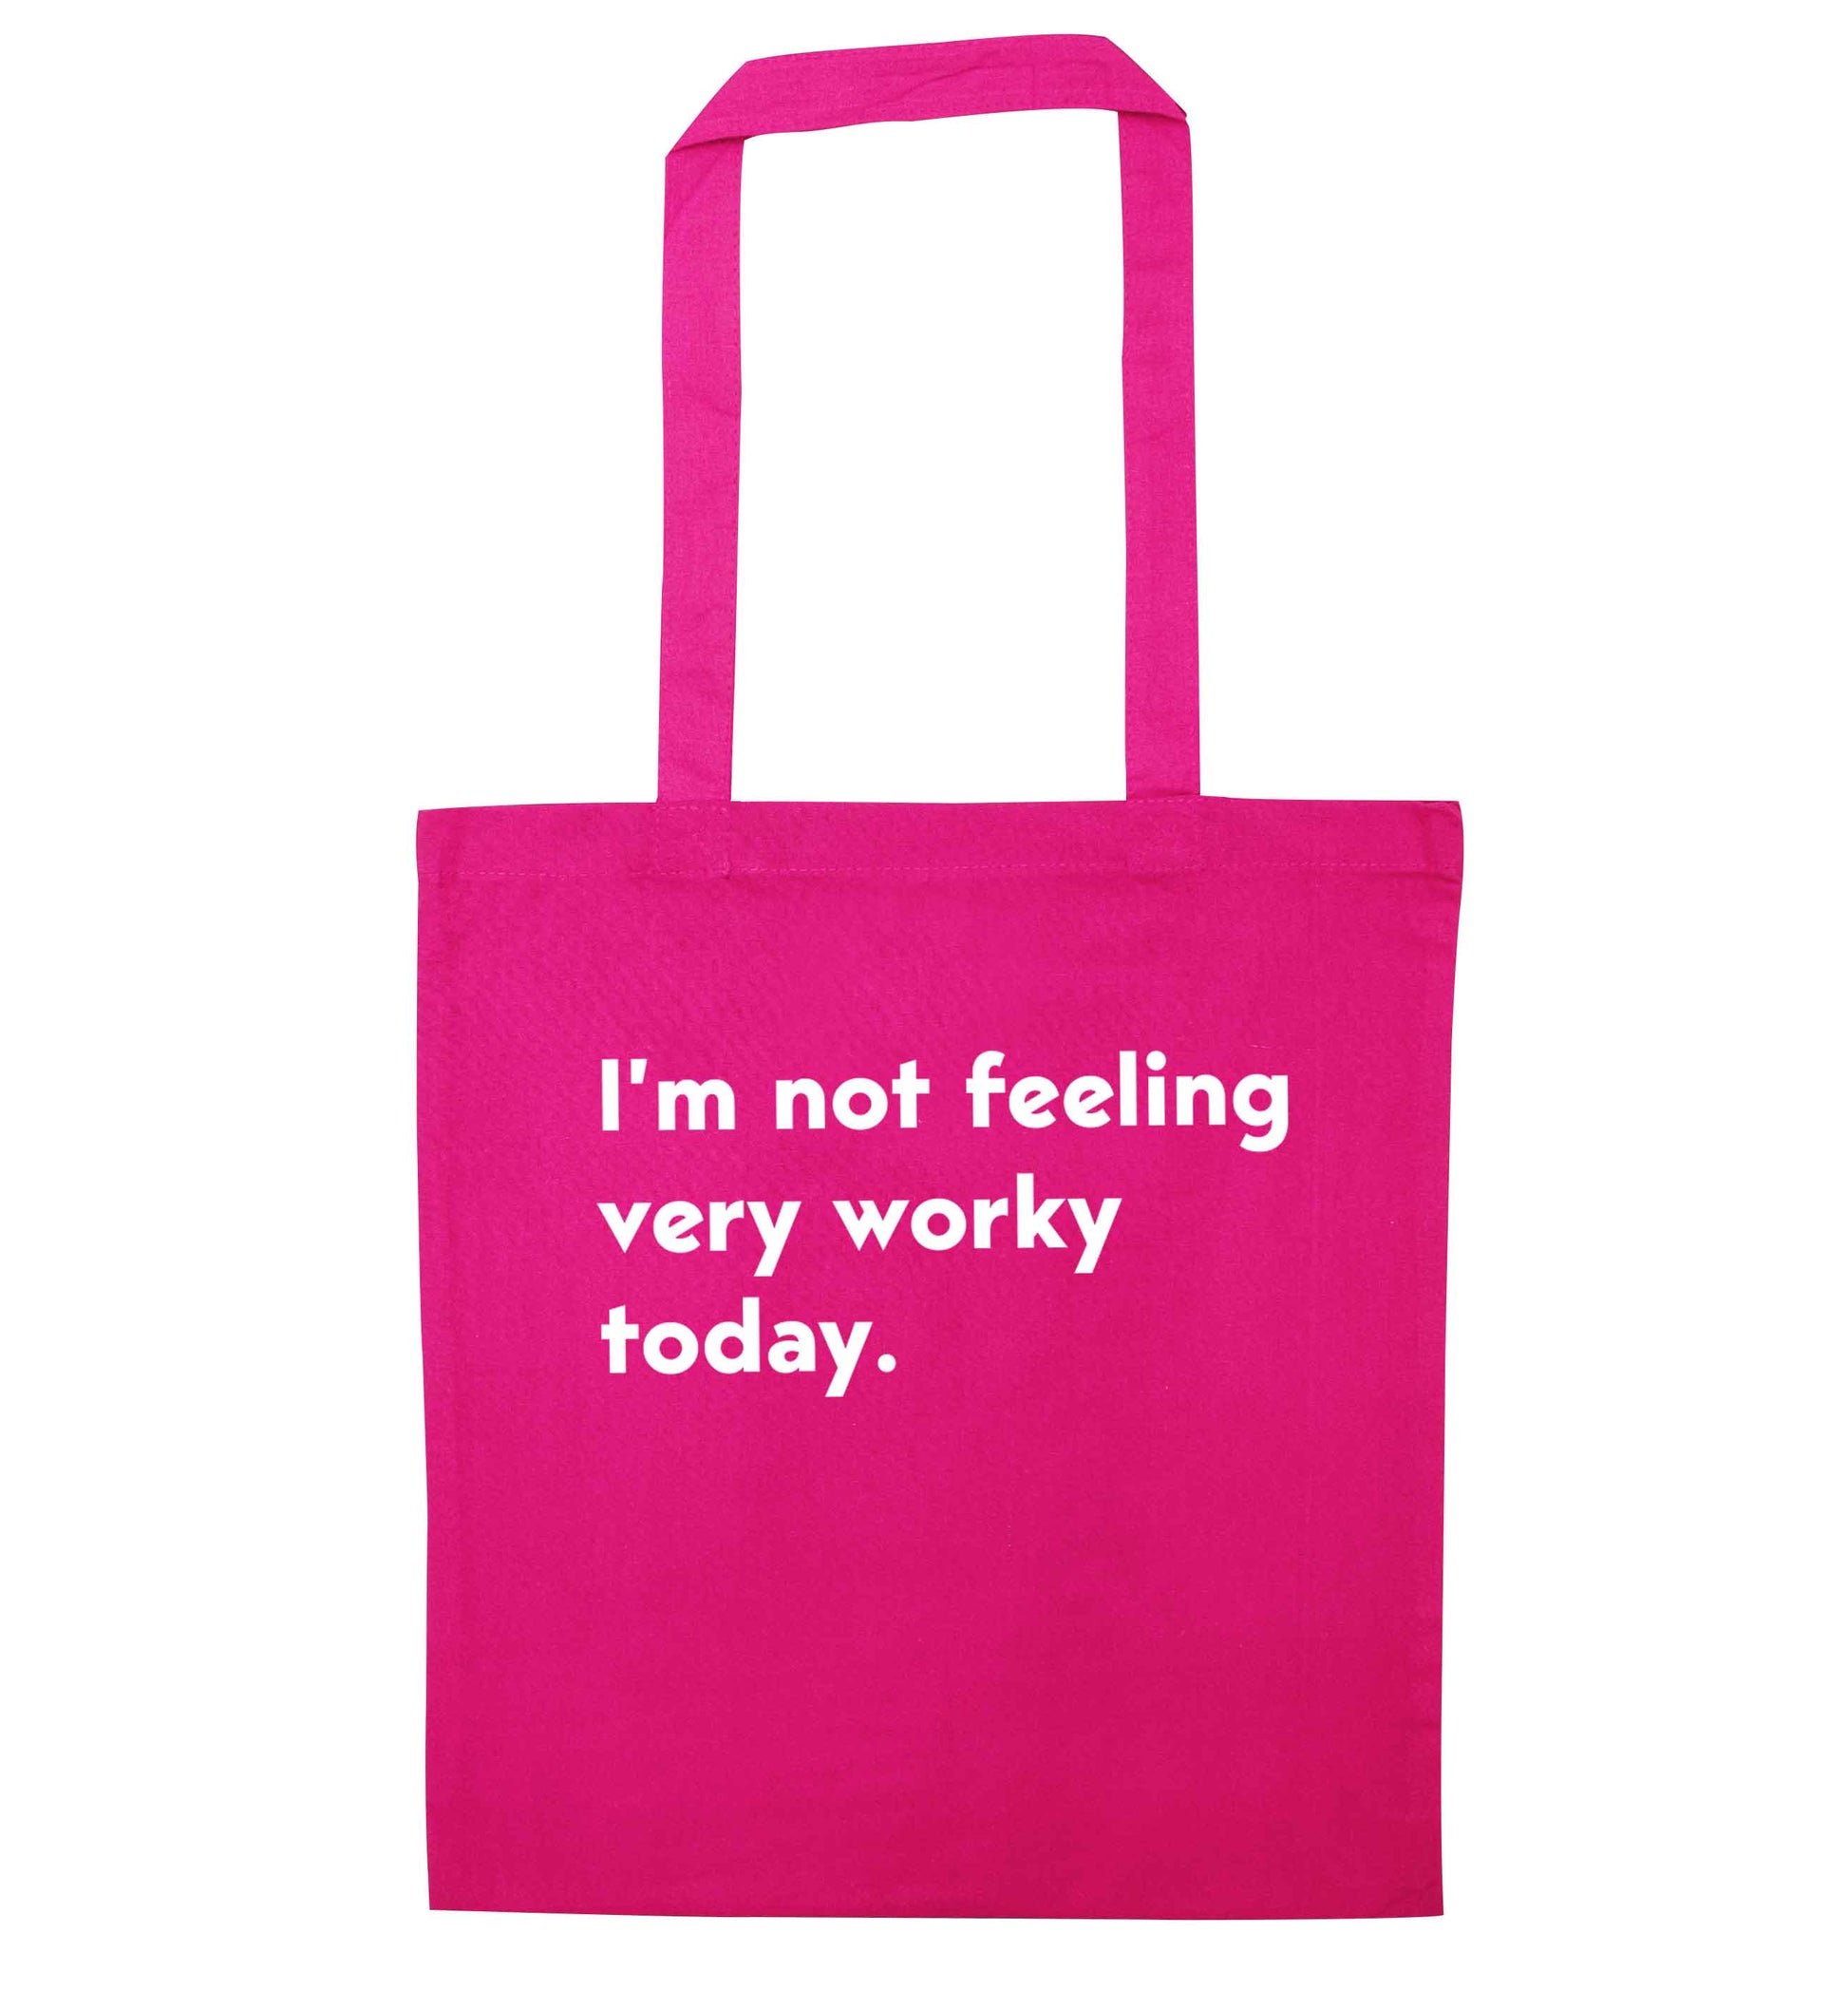 I'm not feeling very worky today pink tote bag